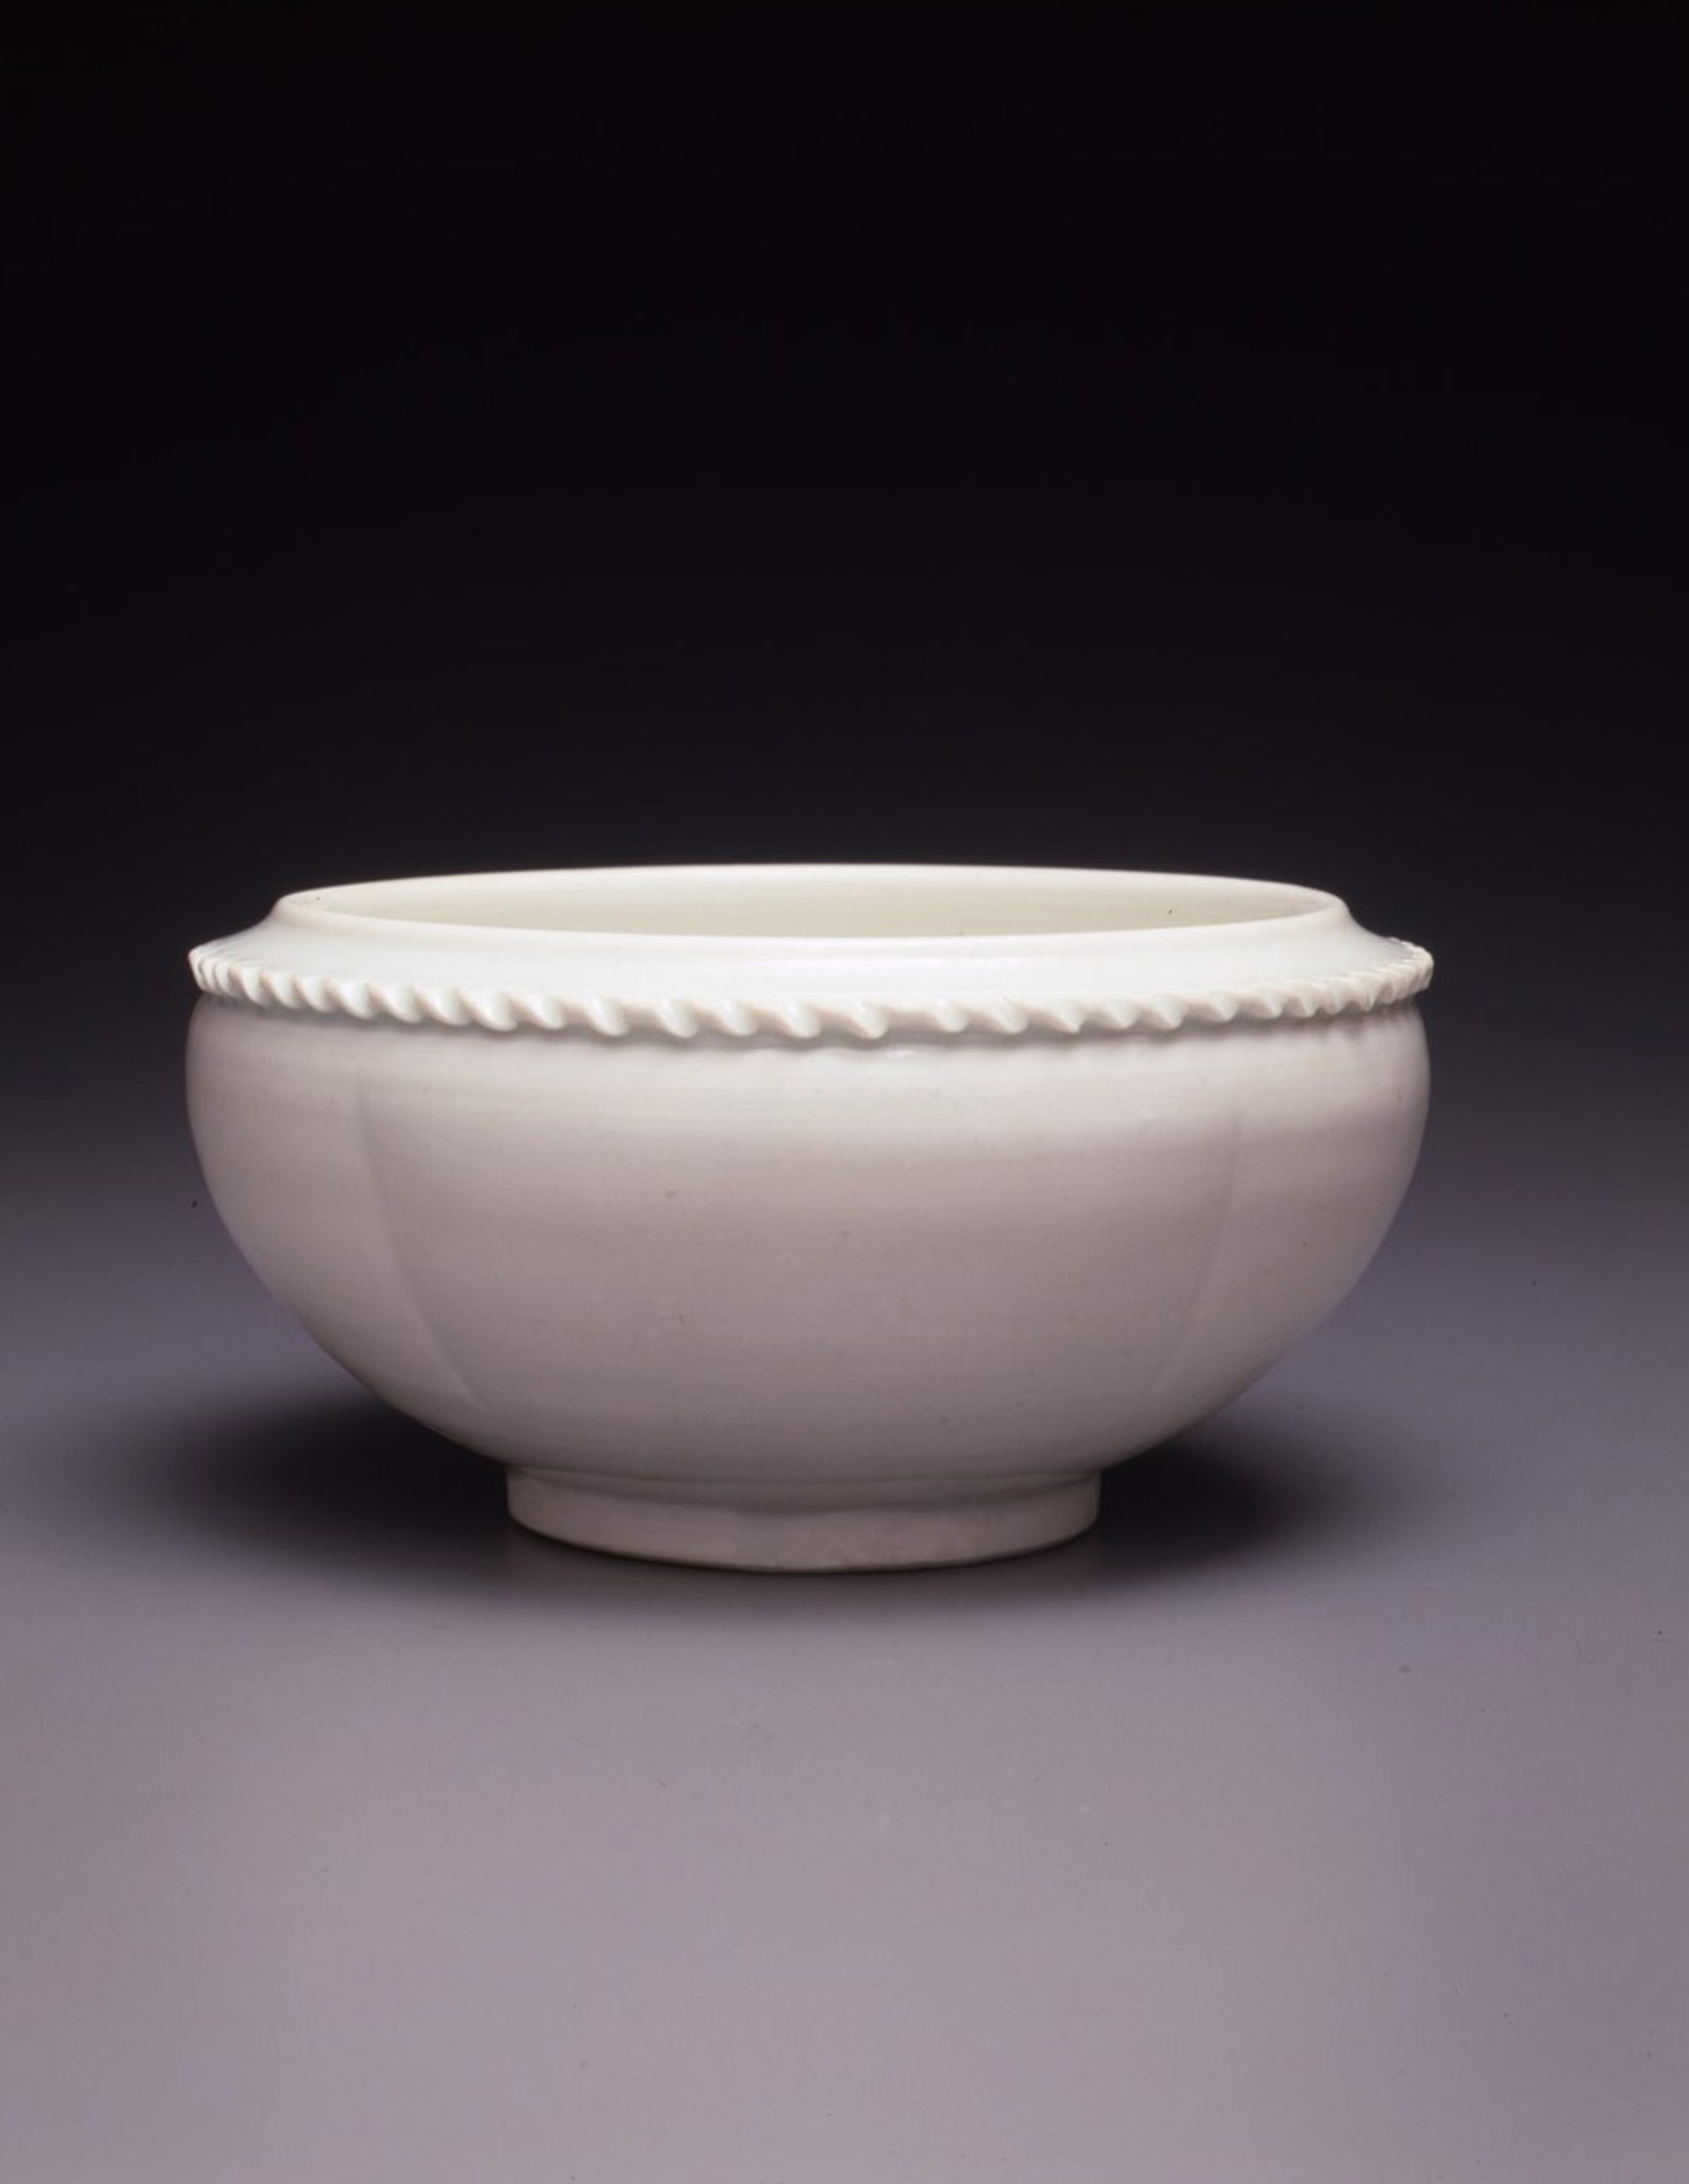 WHITEWARE BOWL WITH A SCROLLED EDGE by 